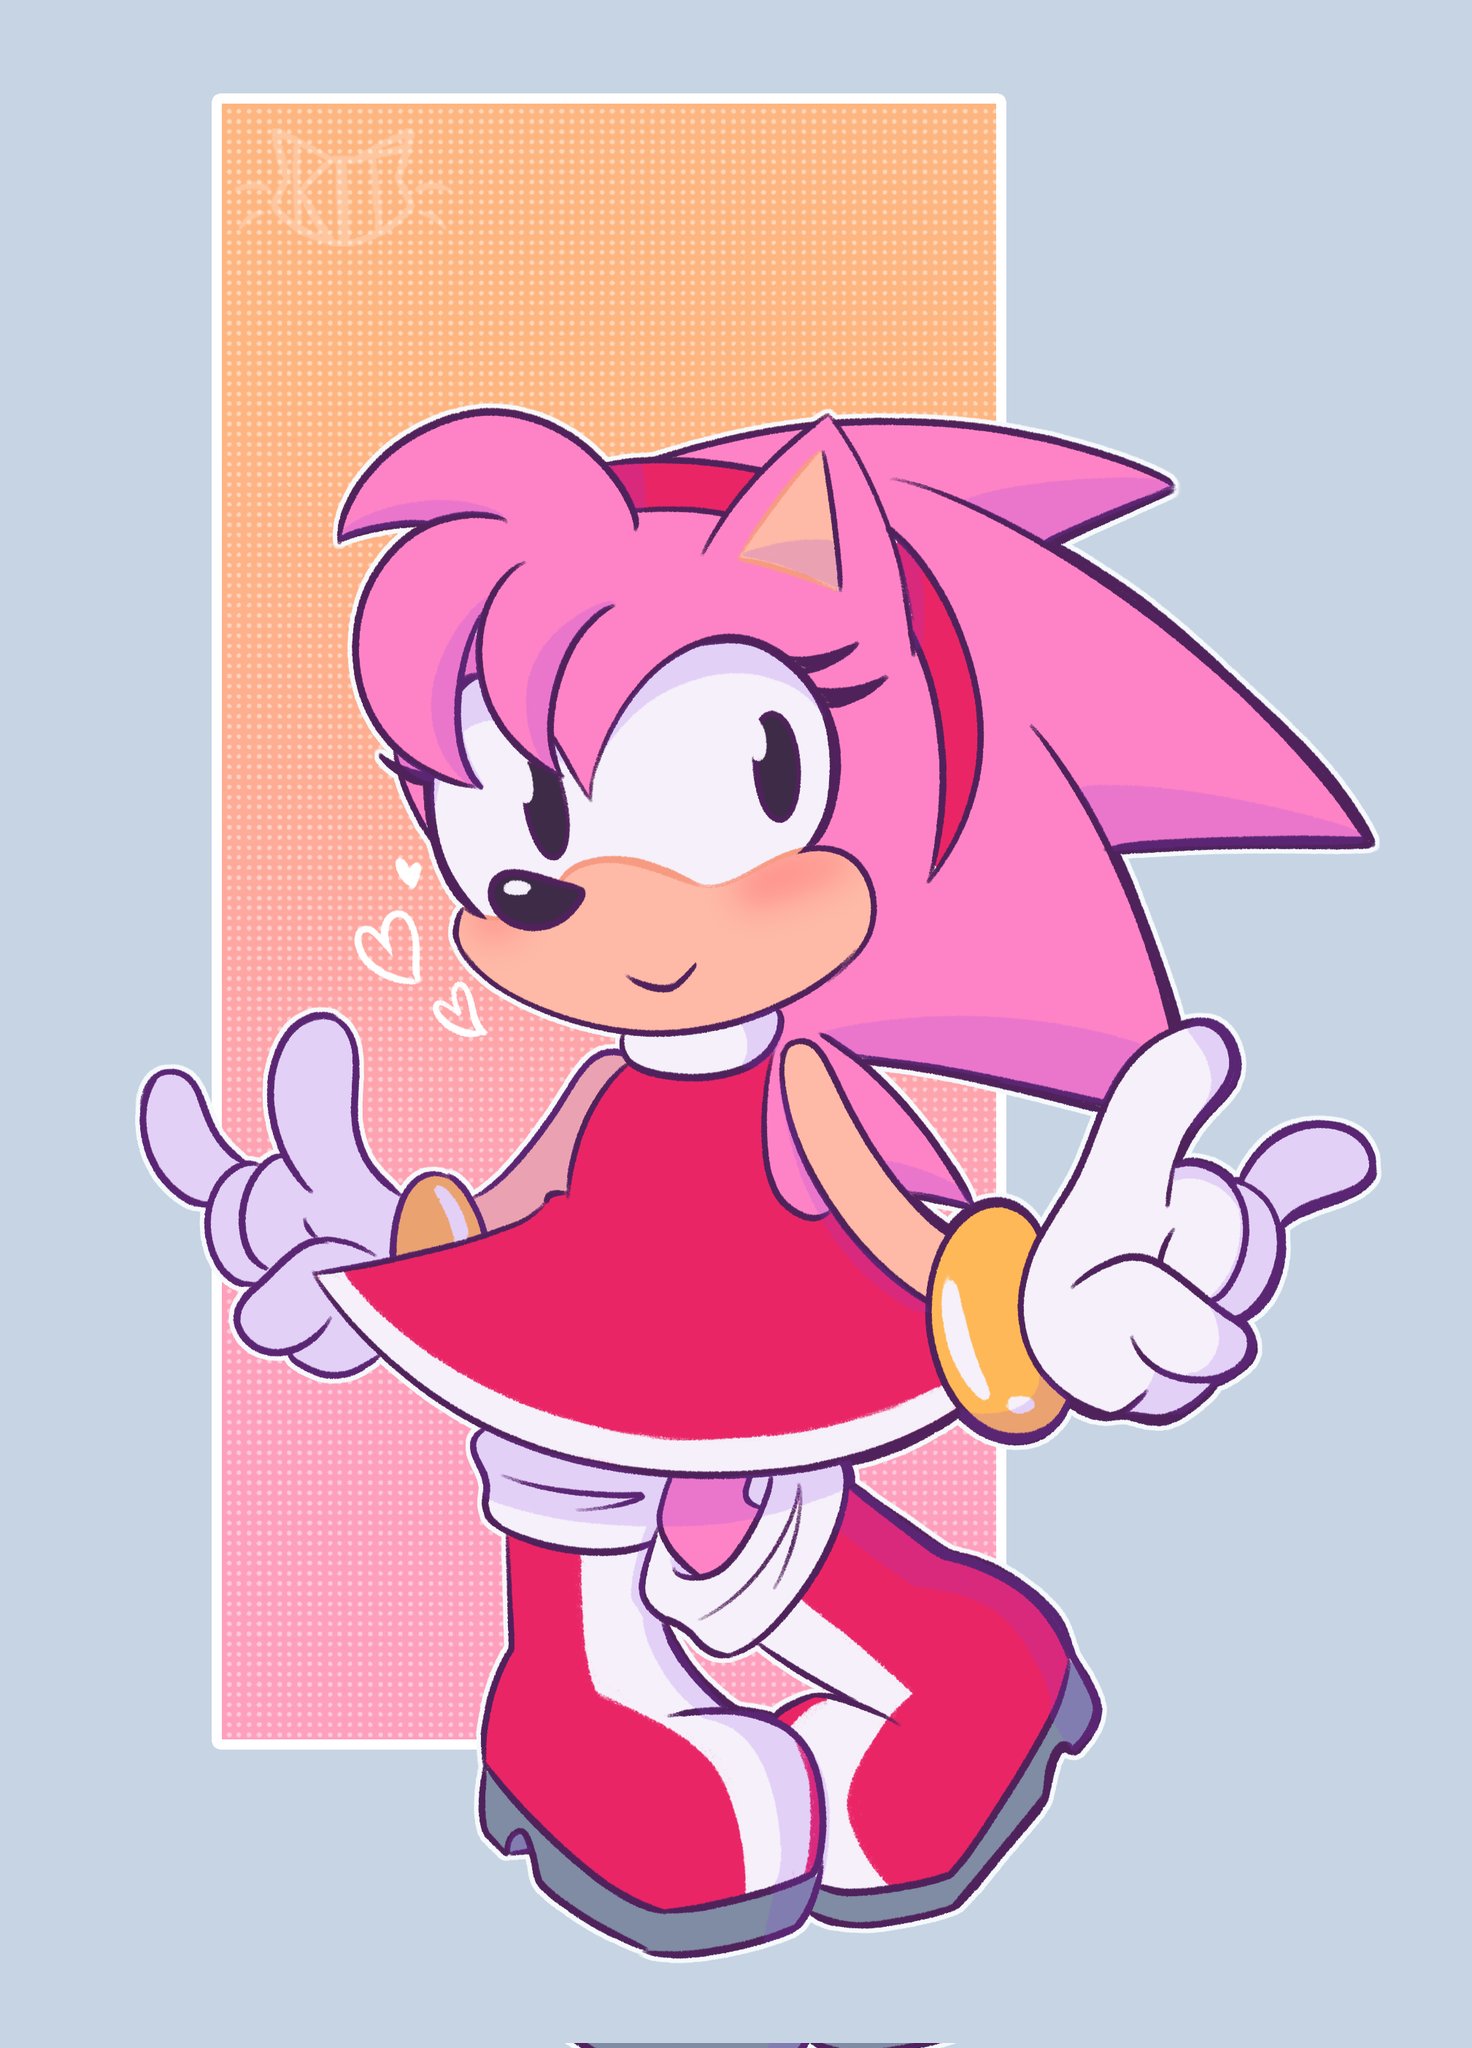 Sonic Superstars Shows Off Amy's Modern Outfit, Free To